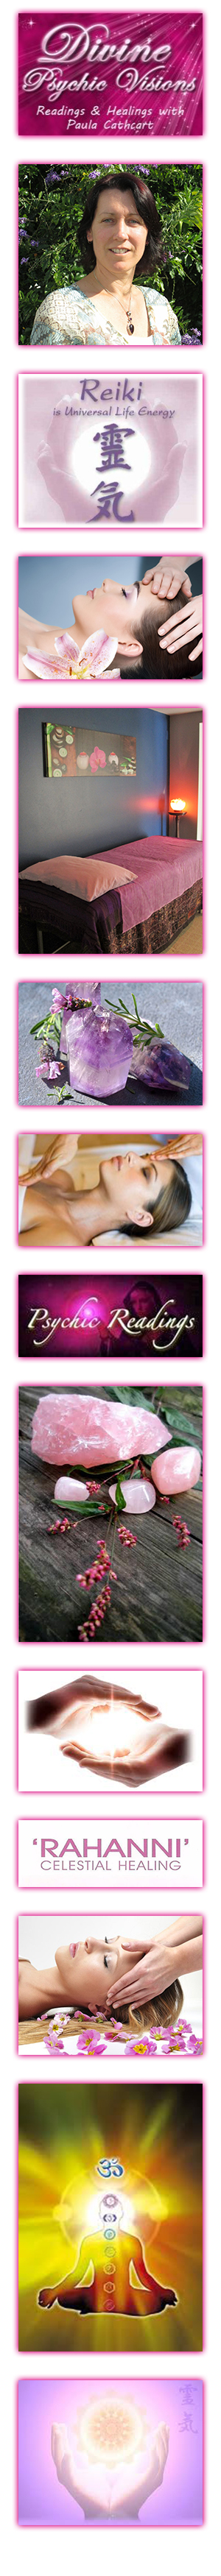 Profile picture for Reiki Training, Distant Healing & Psychic Readings with Paula